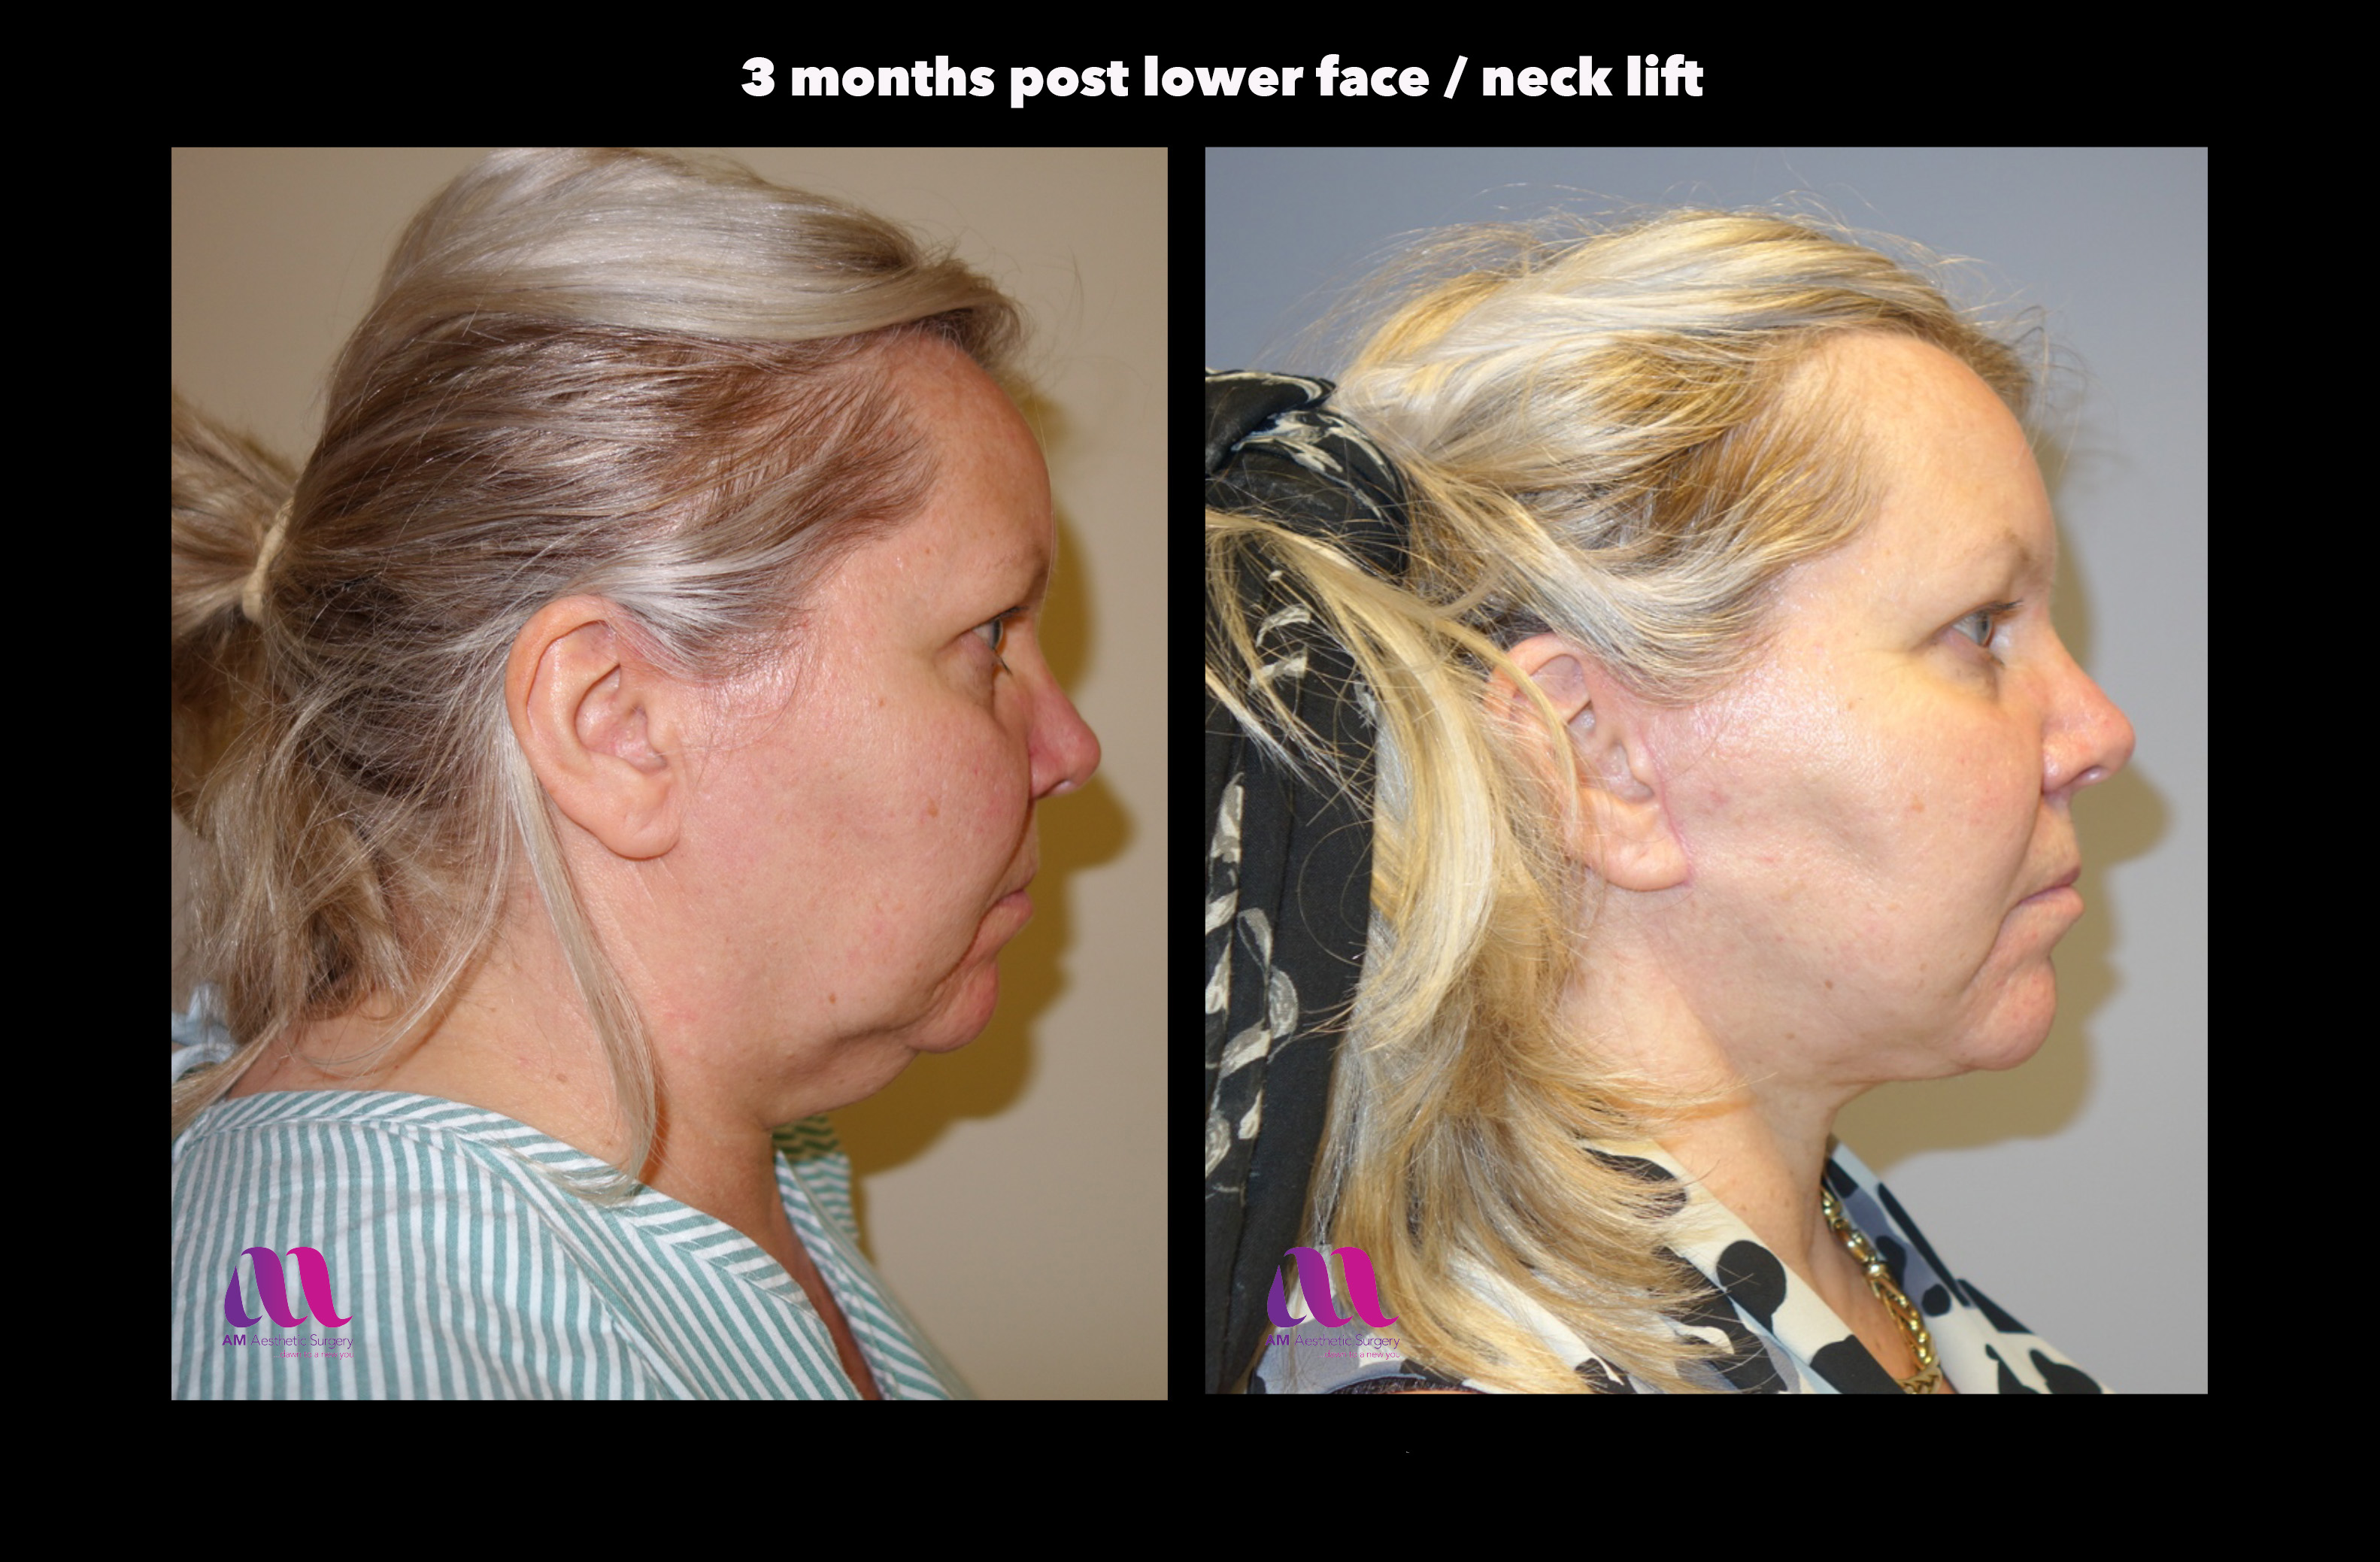 Facelift cosmetic surgery in Ireland